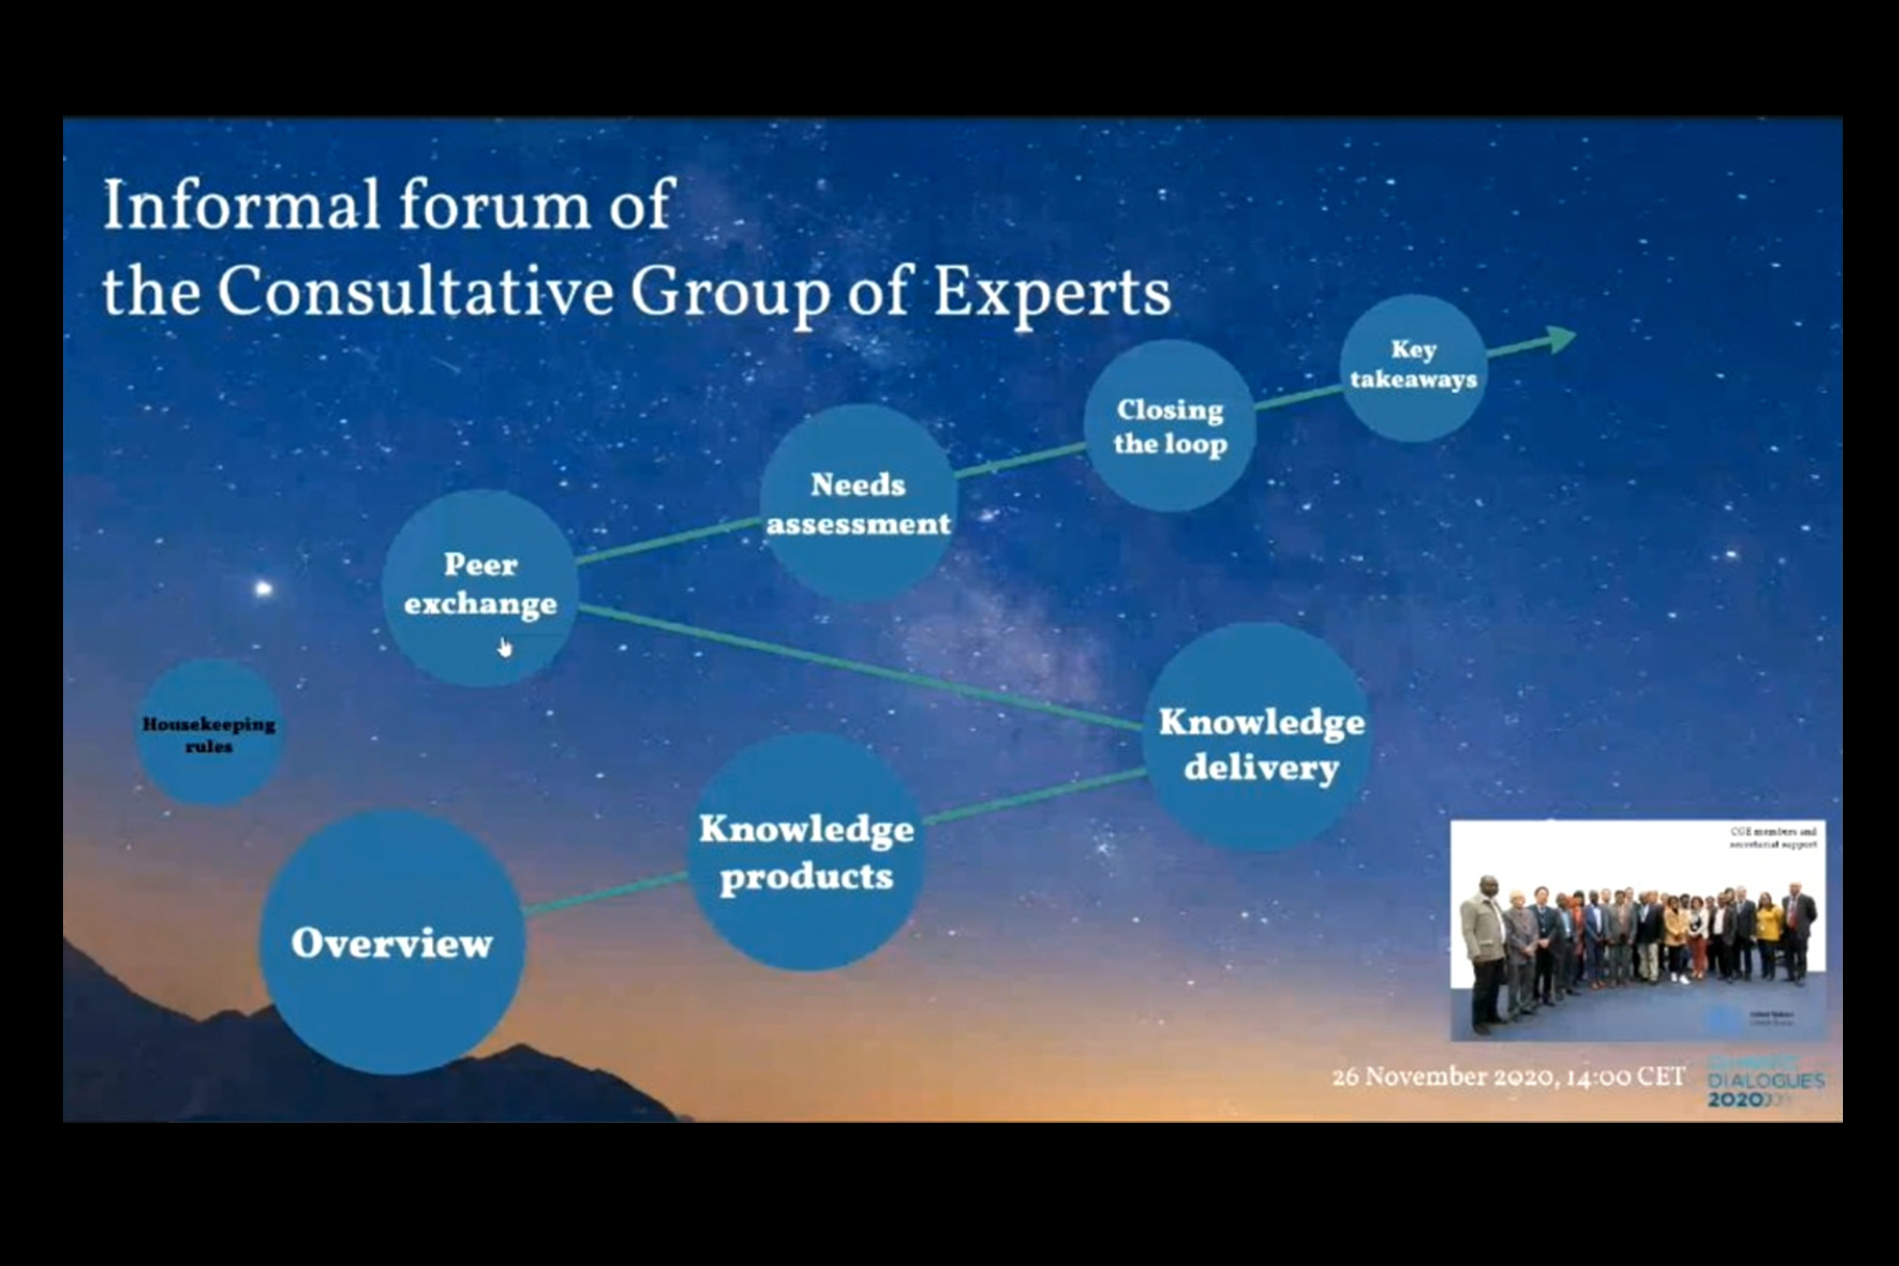 A slide from the CGE Informal Forum